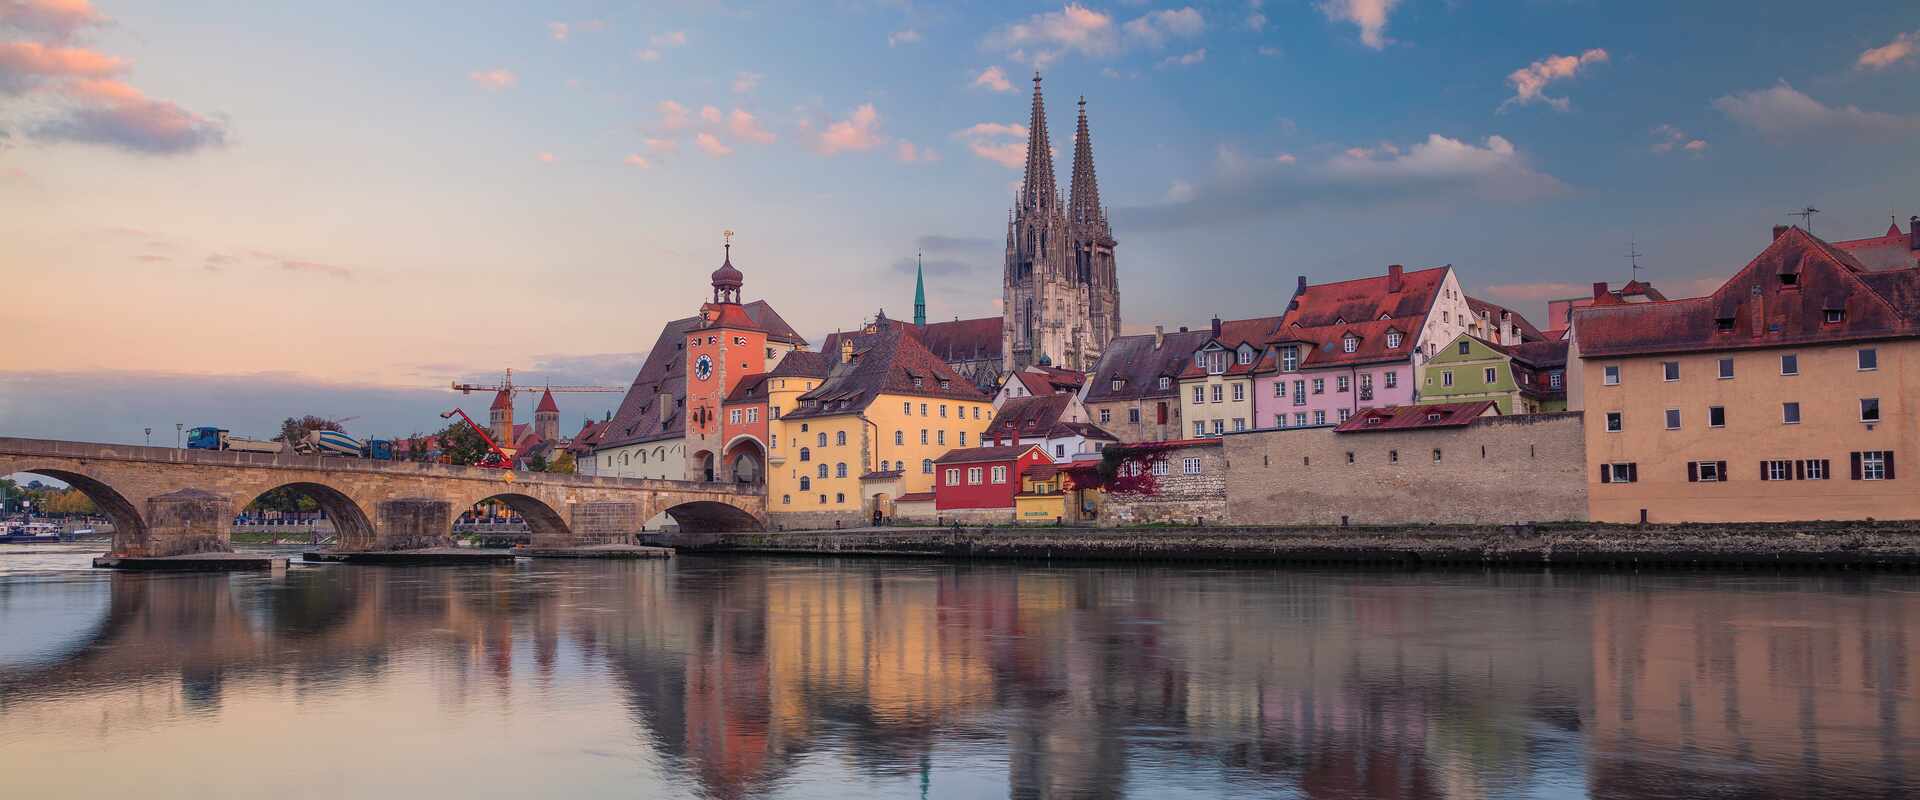 The cityscape and river views of Regensburg, Germany